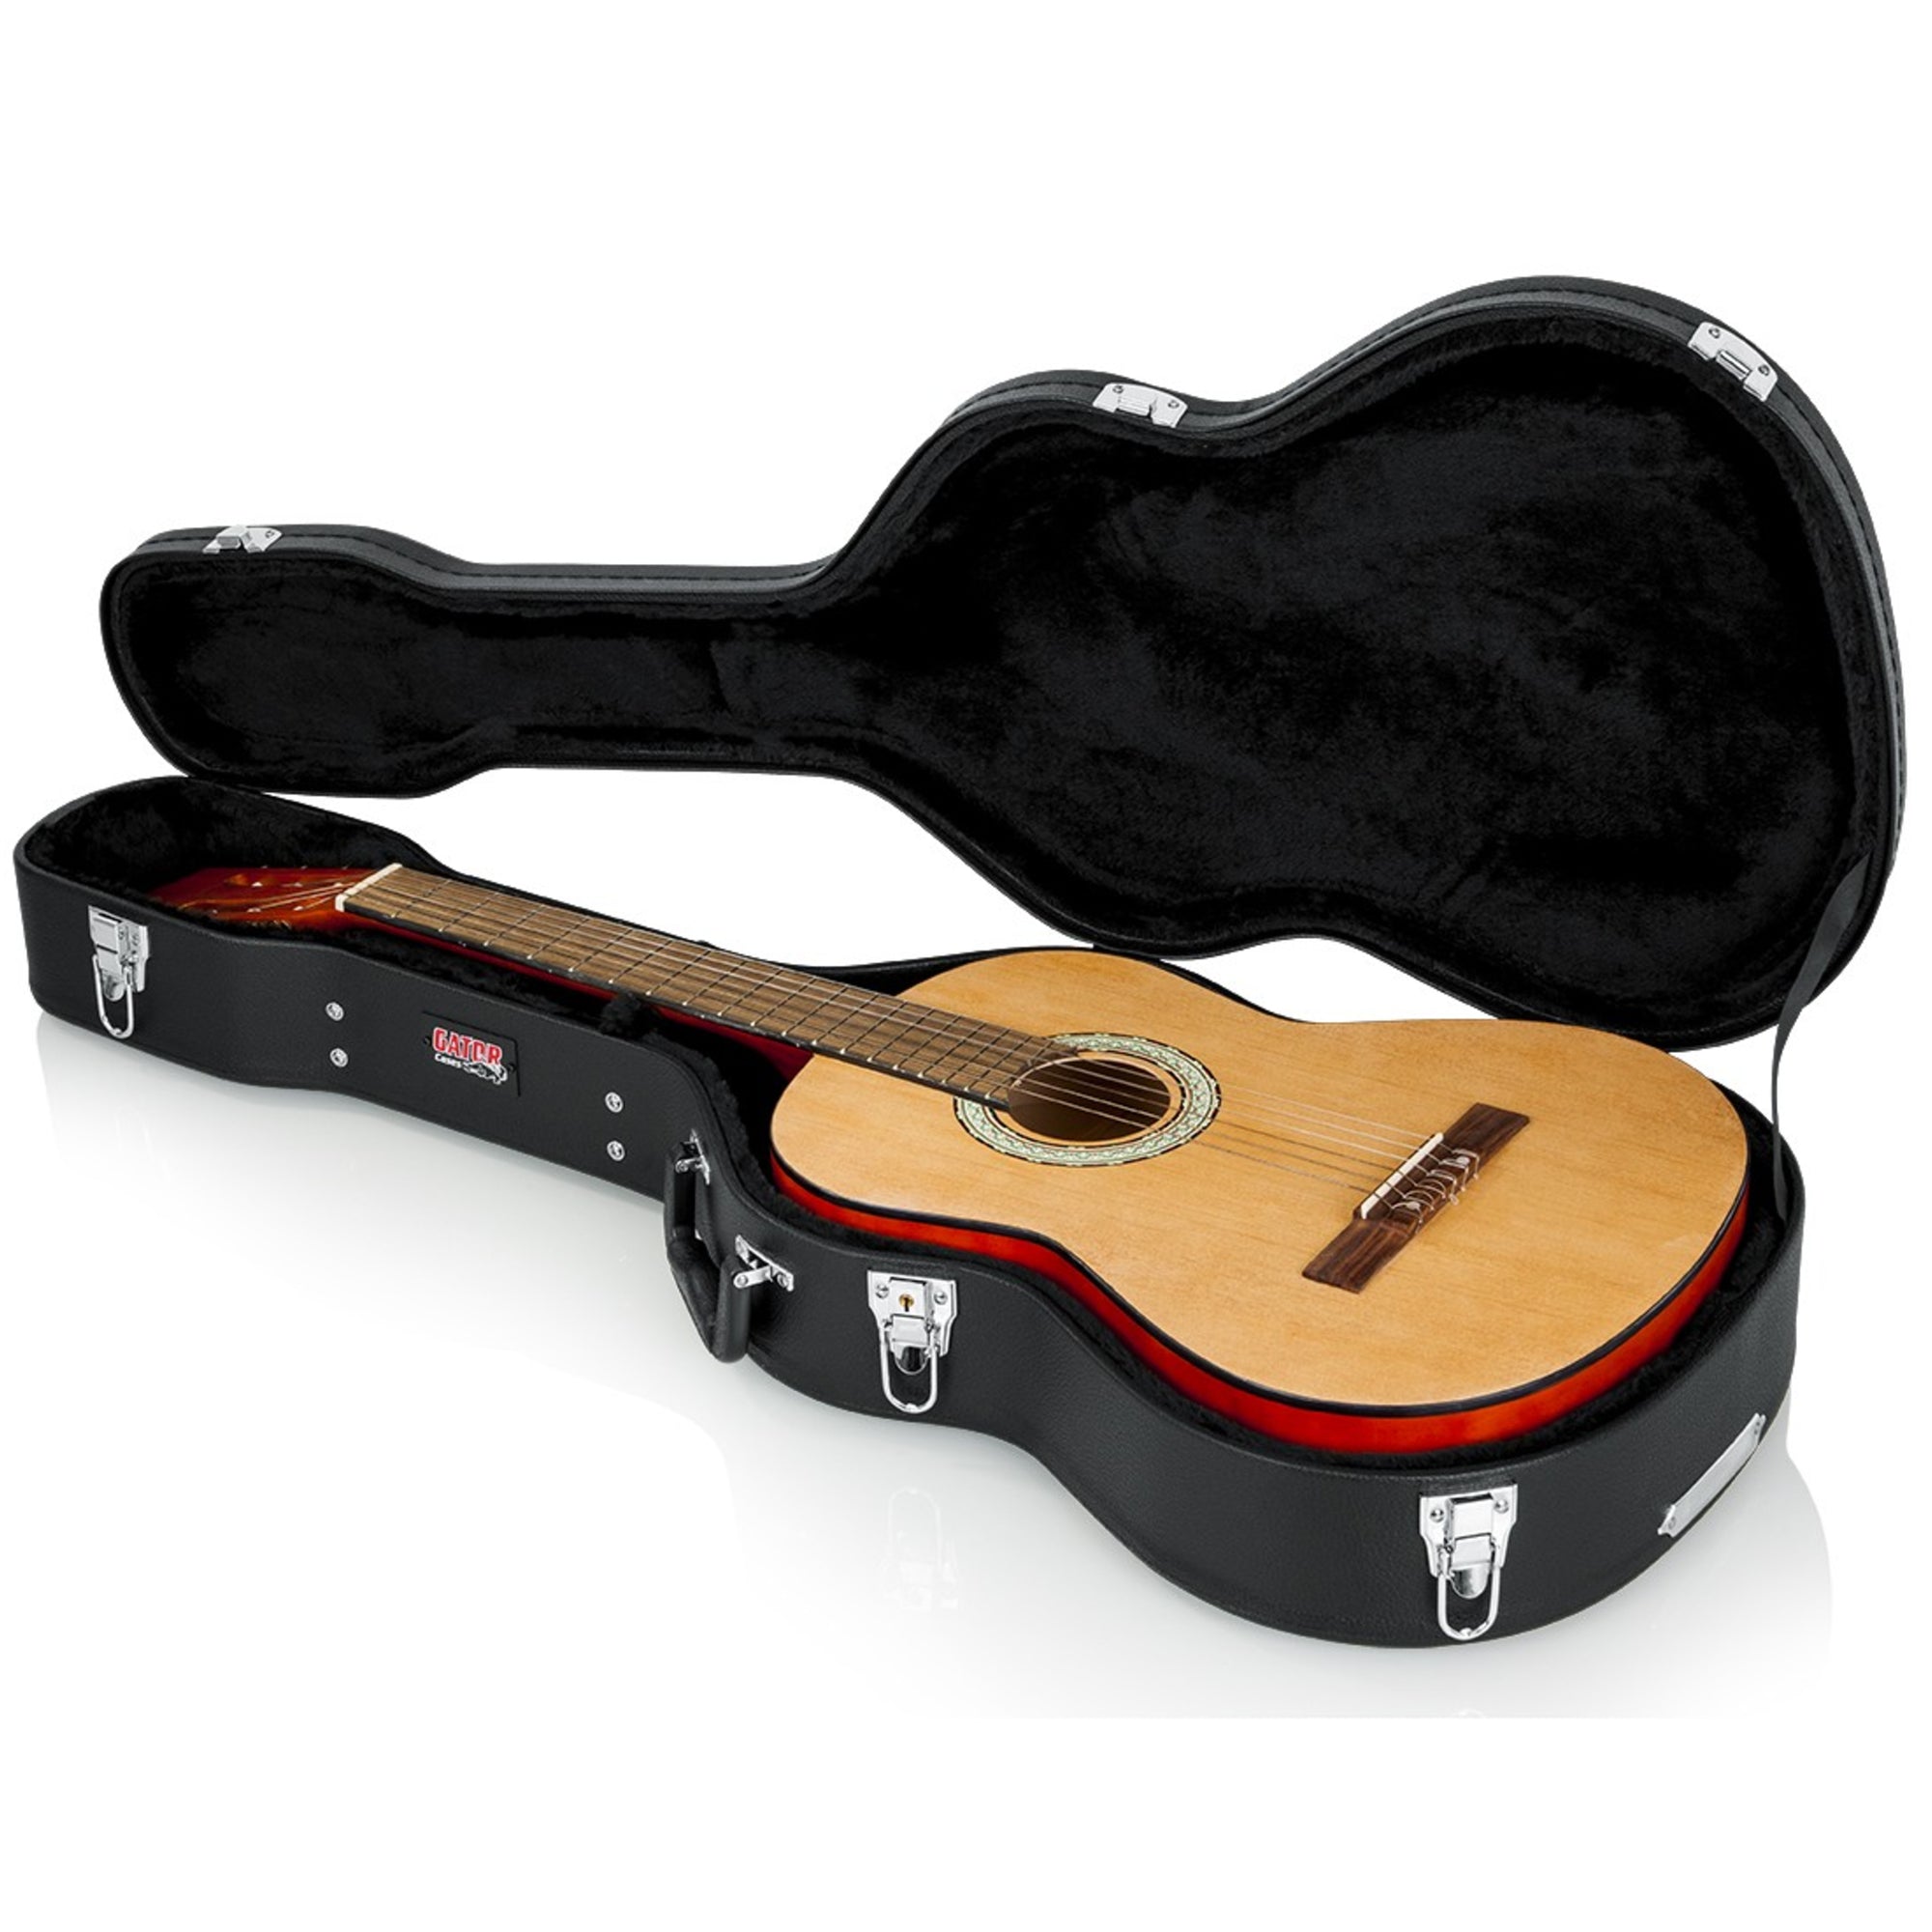 Gator Classical Wood Guitar Case GWE-CLASSIC Open with Guitar inside